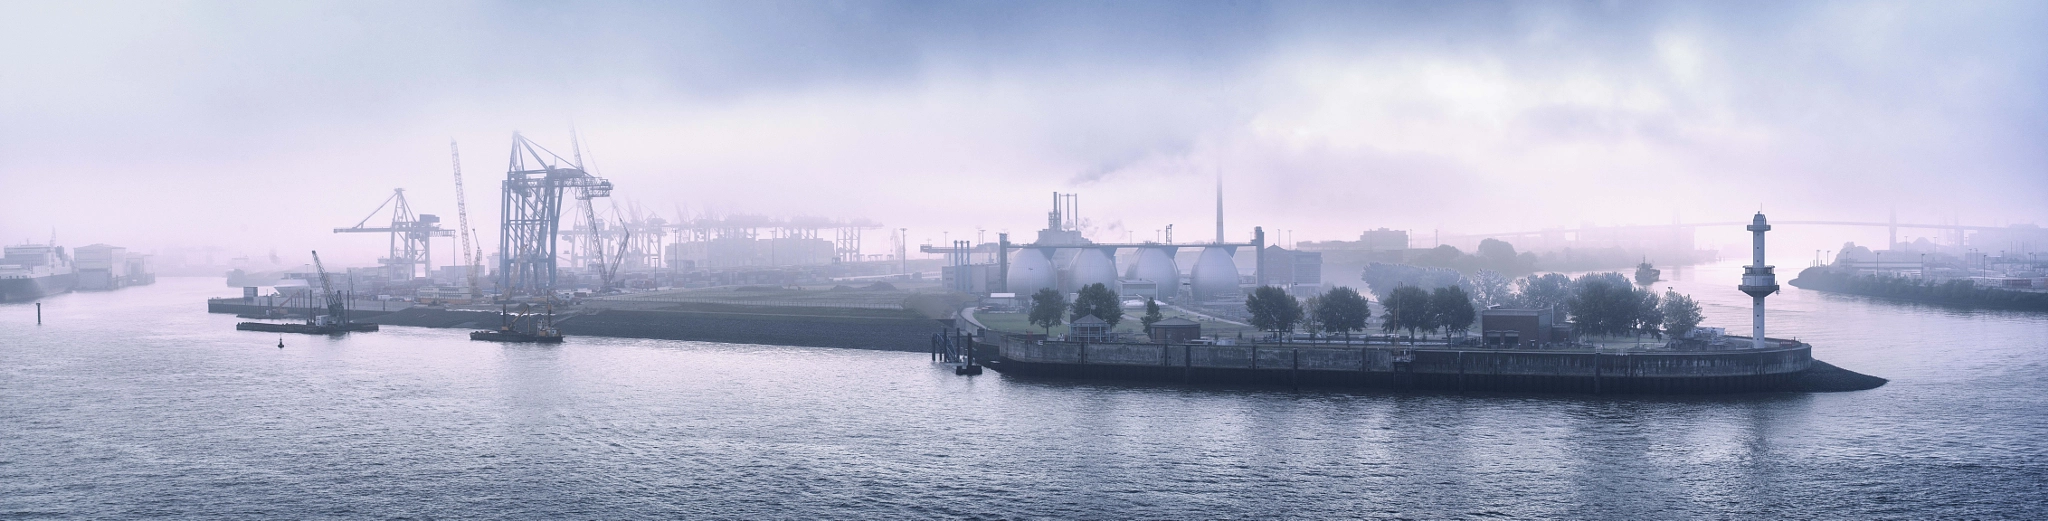 Sony a7R sample photo. Hhhafen panorama photography